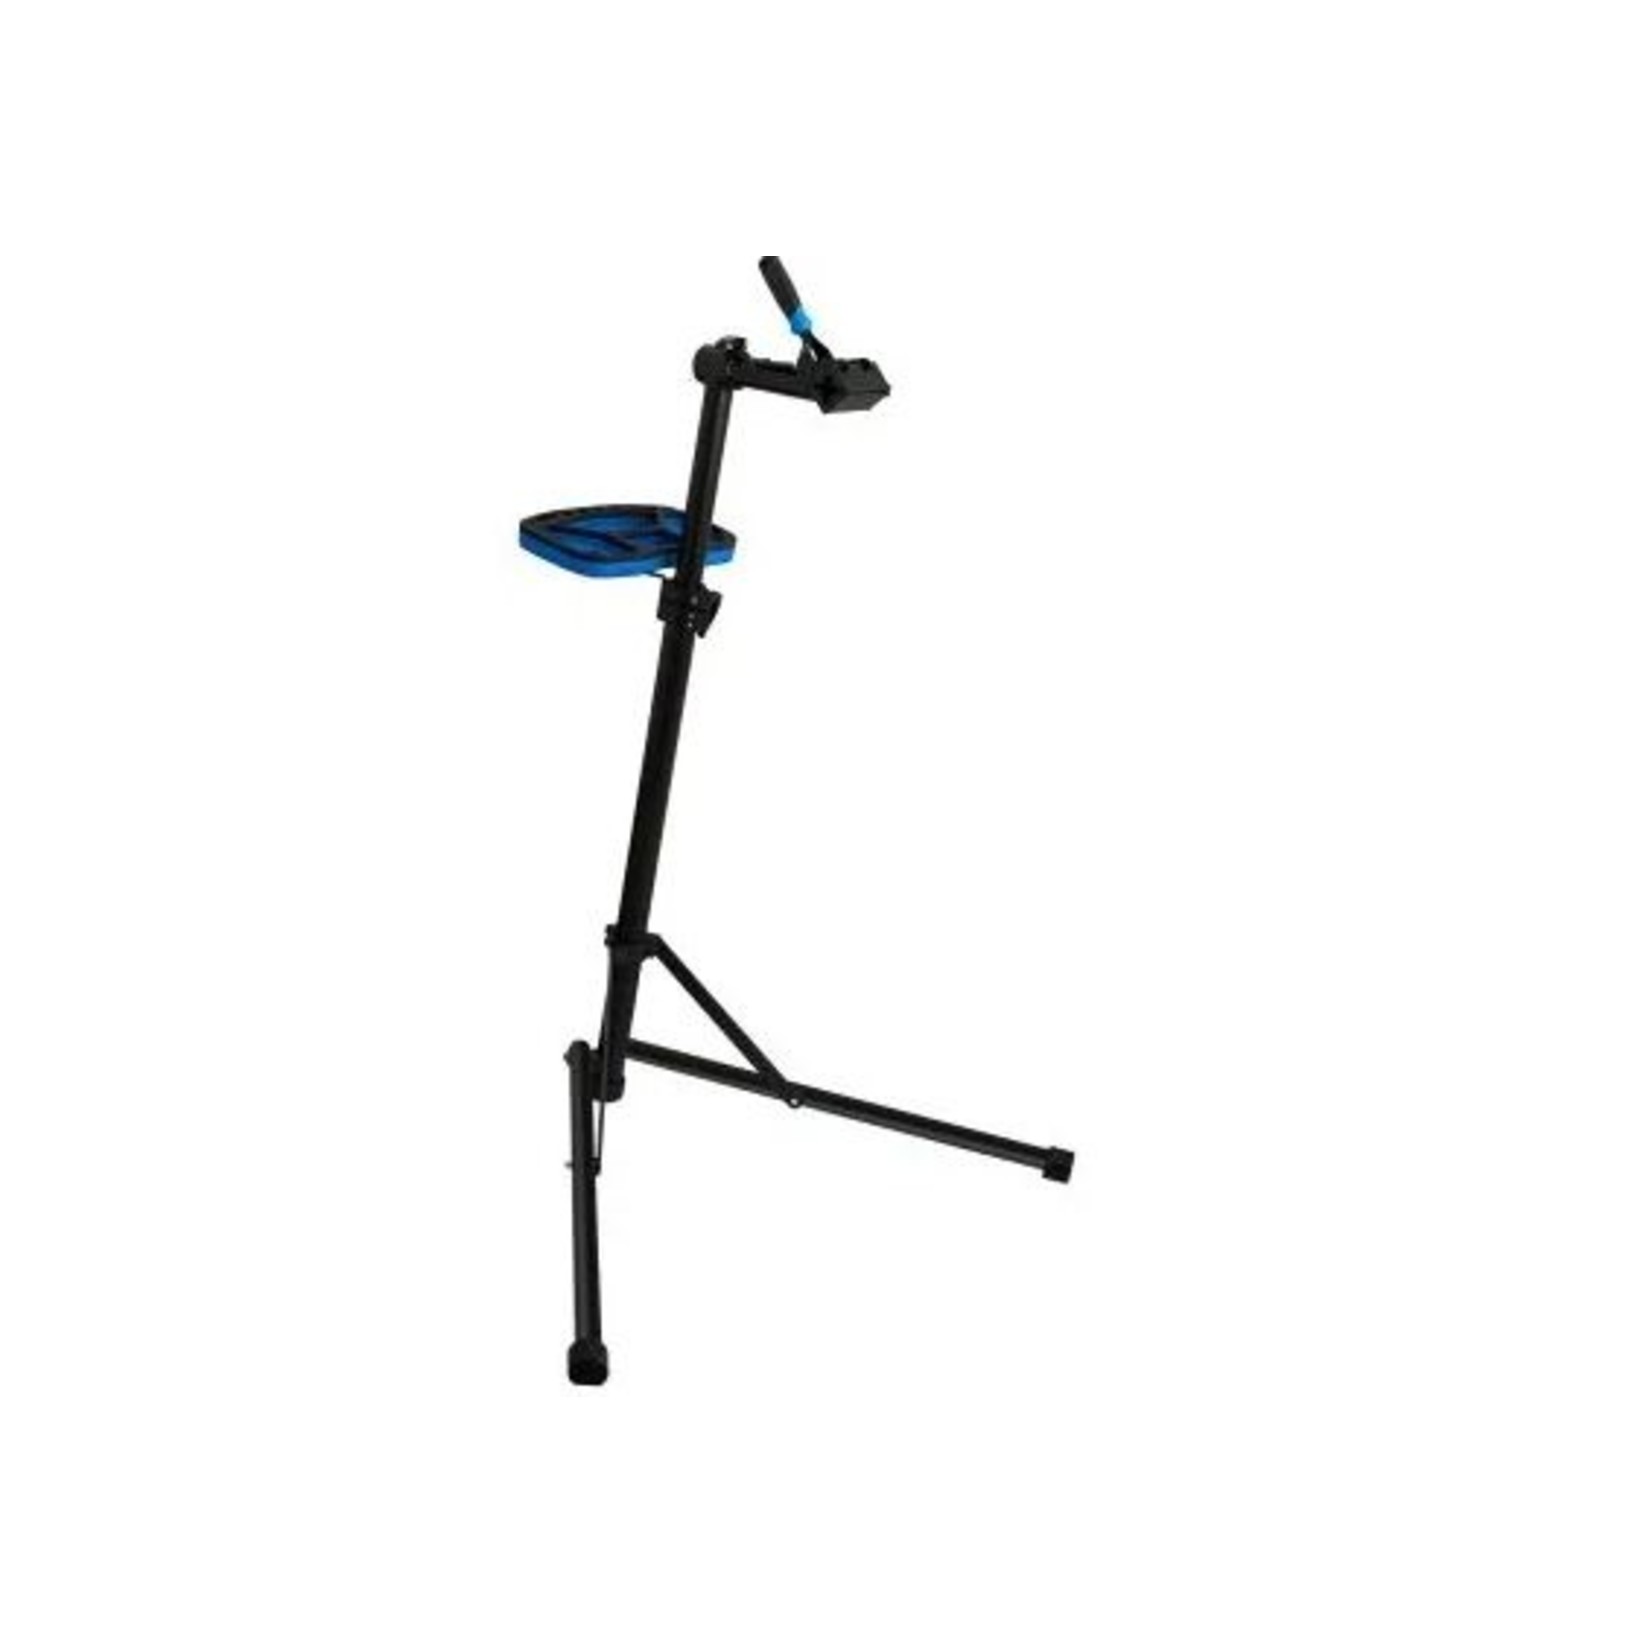 unior Unior Workstand With Sprung Clamp, Foldable Tripod Base 621470 Bicycle Tool